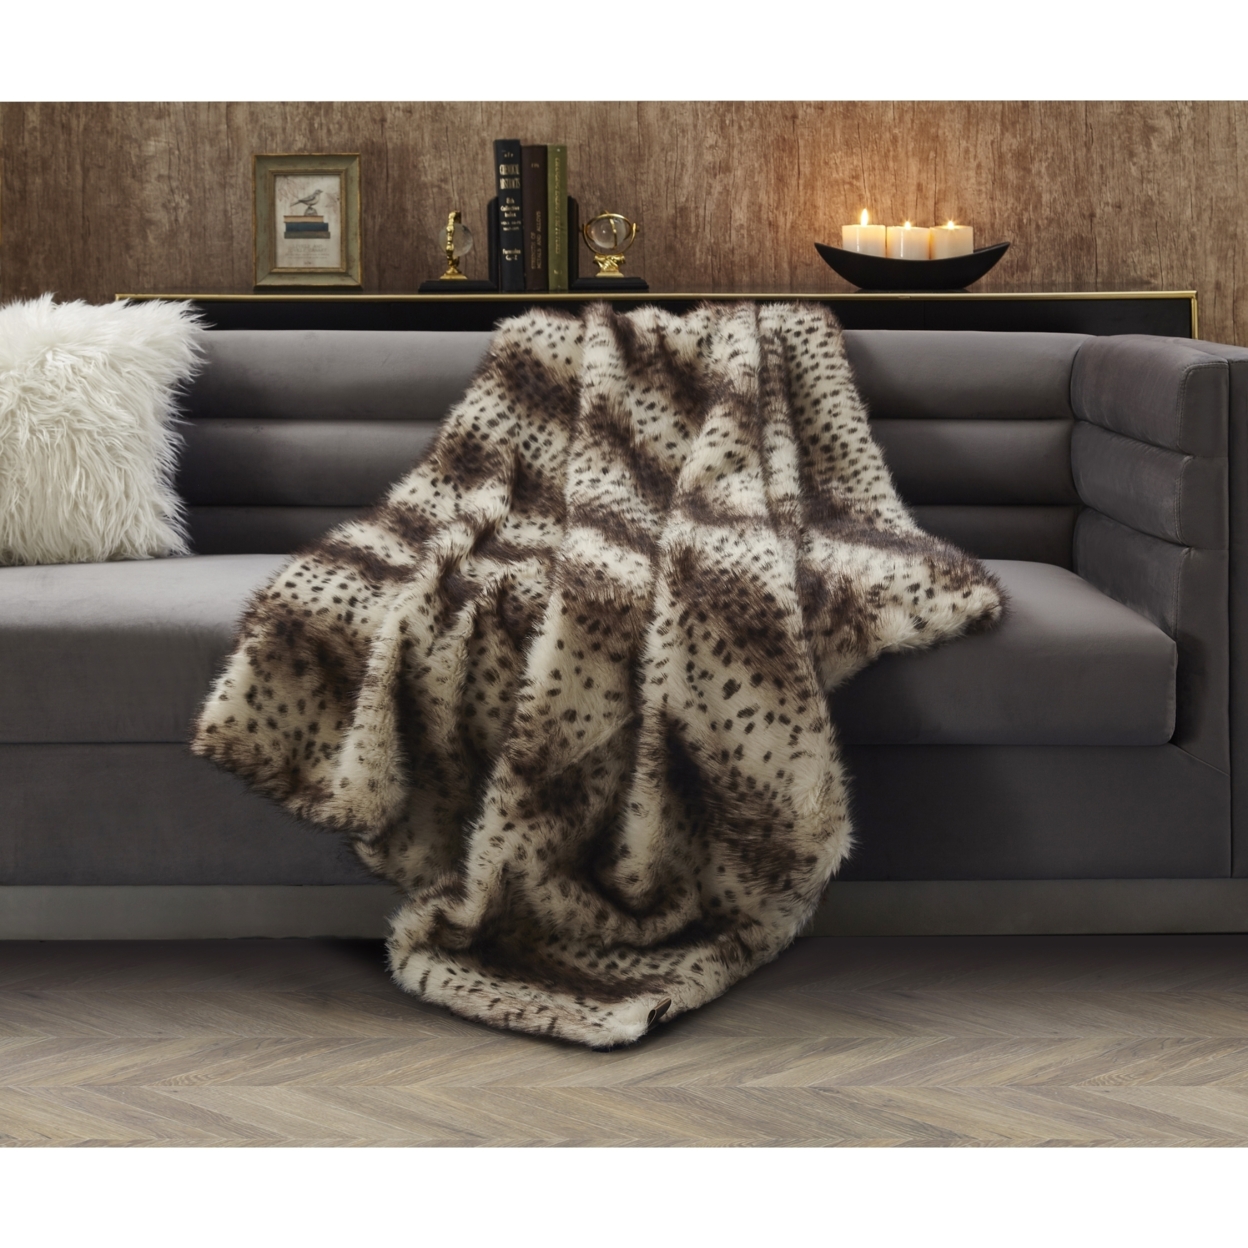 Avani Throw- Faux-Shaggy And Snuggly-Fluffy Cozy Texture - Brown Fox